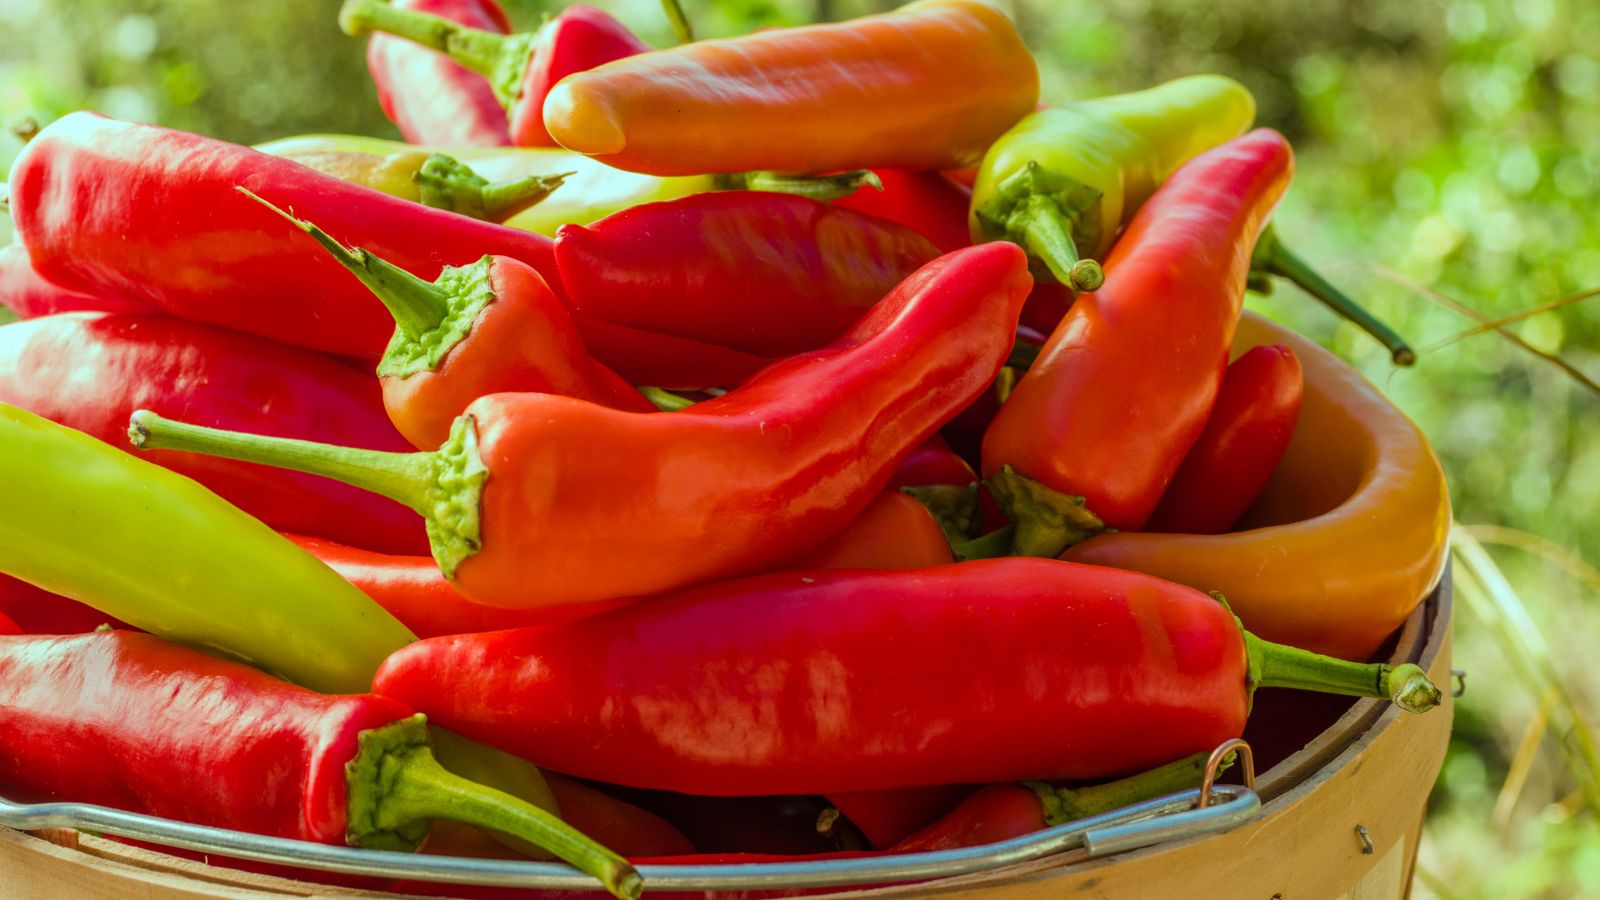 When to harvest banana peppers – 5 expert tips for picking when they're ripe